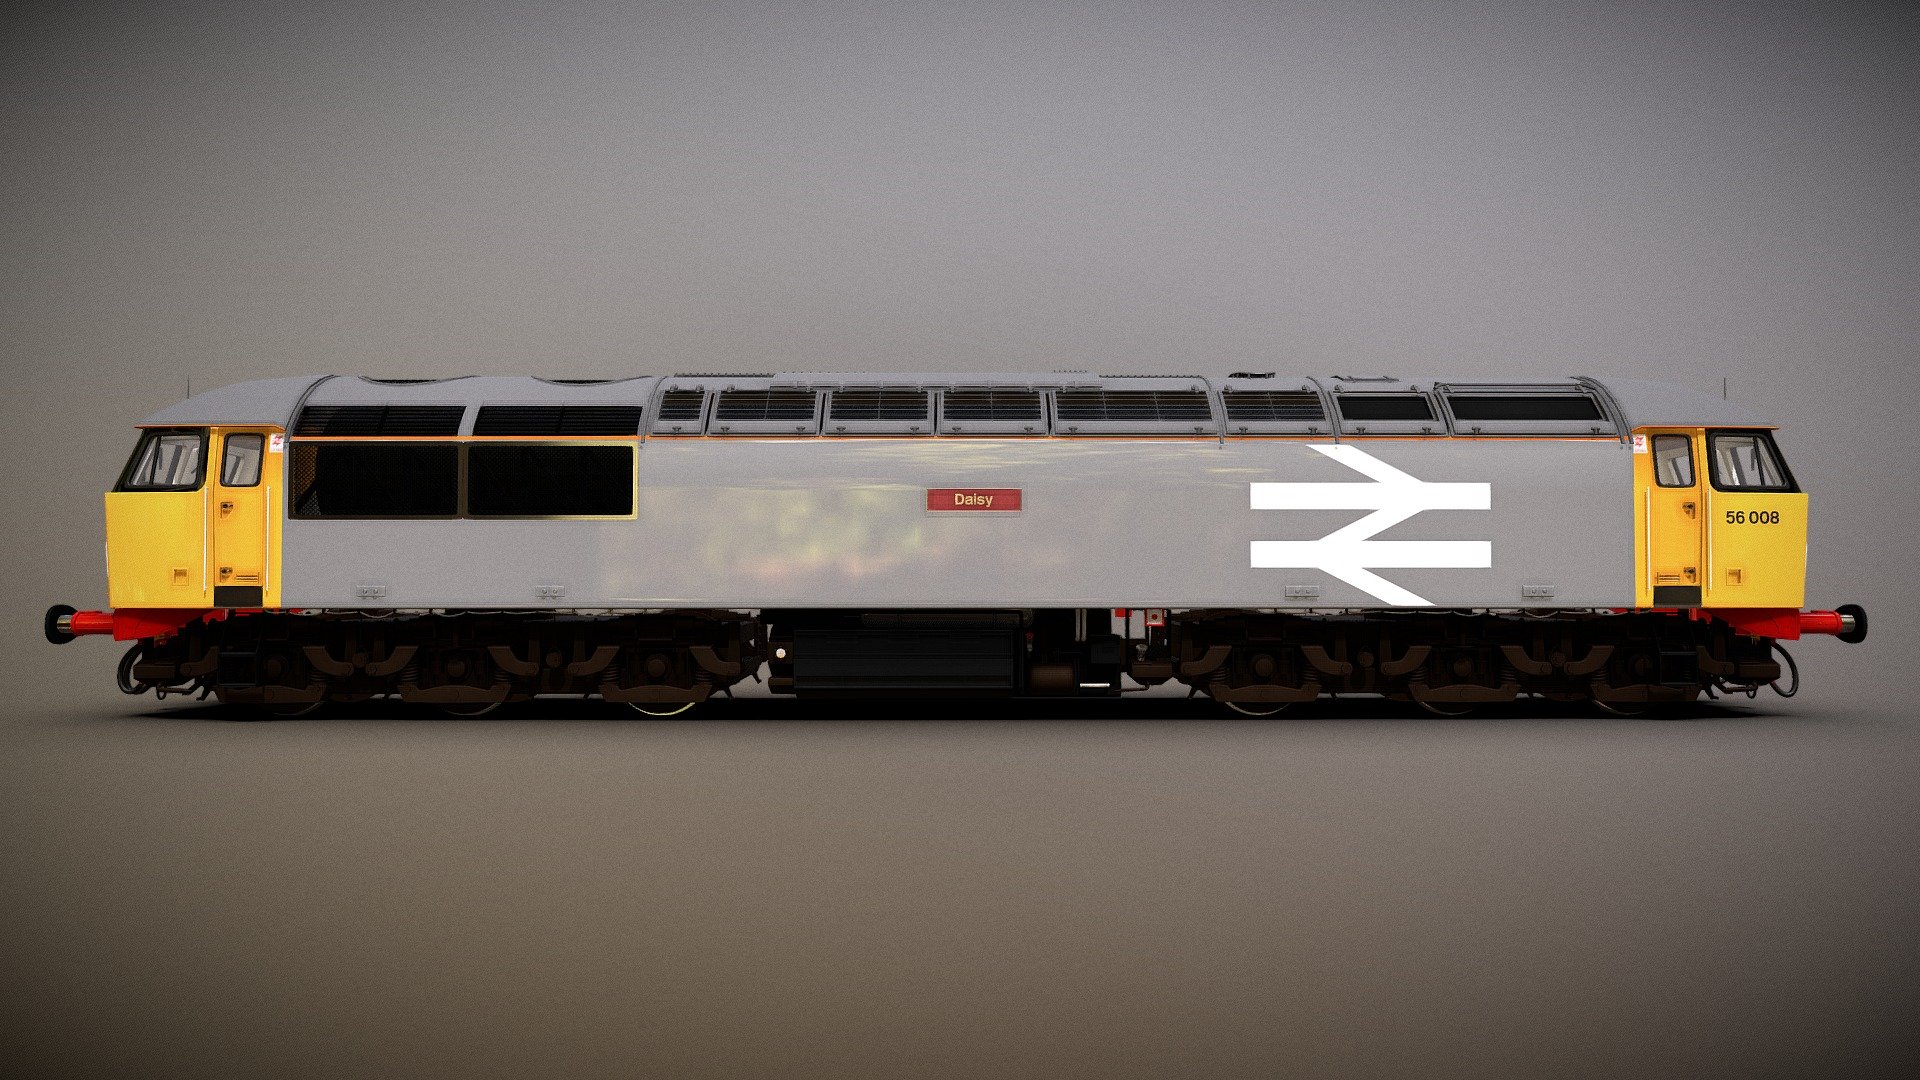 Class 56 Locomotive in British Rail Railfrieght Livery

Modelled in Blender 2.91

Updated to include, hazzard signage and door handles

I'm not sure how to credit someone properly on here, but I used another creators model for the door handles.  

&ldquo;Door Handle